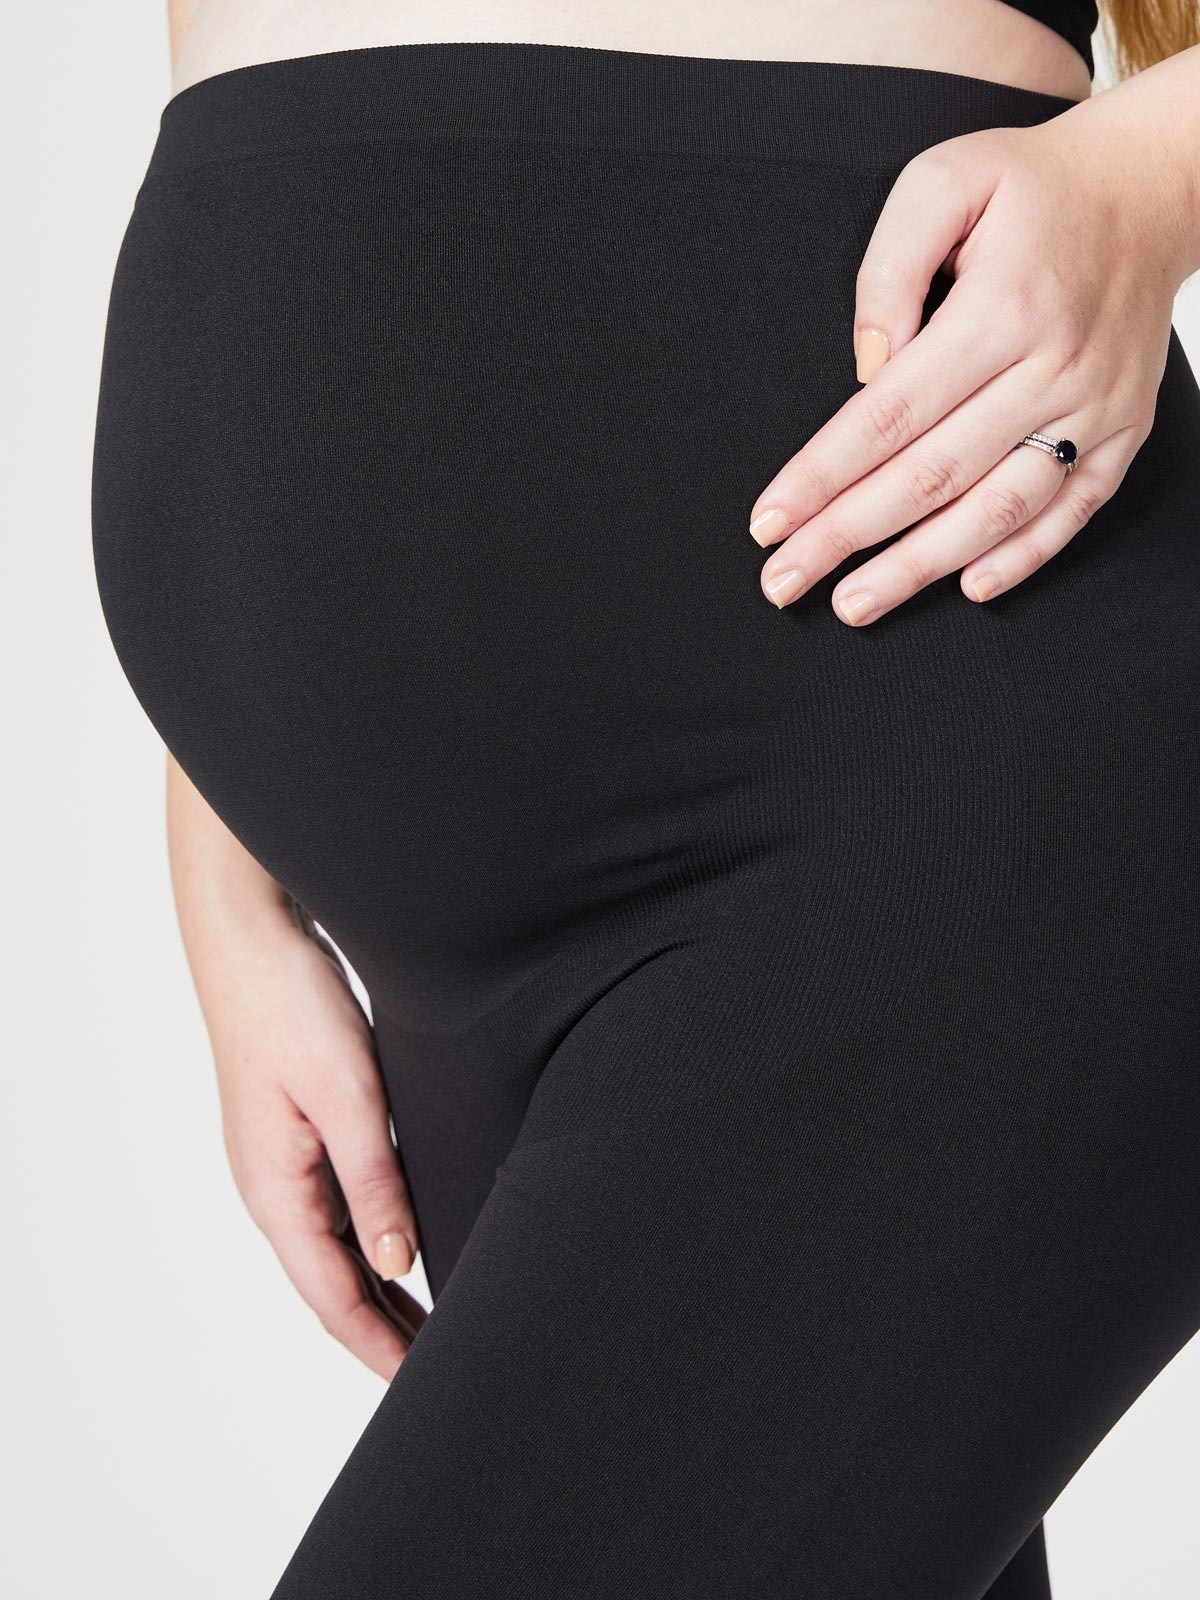 Women's 25 Butterluxe Maternity Leggings Over The Belly - Buttery Soft  Workout Activewear Yoga Pregnancy Pants Sport